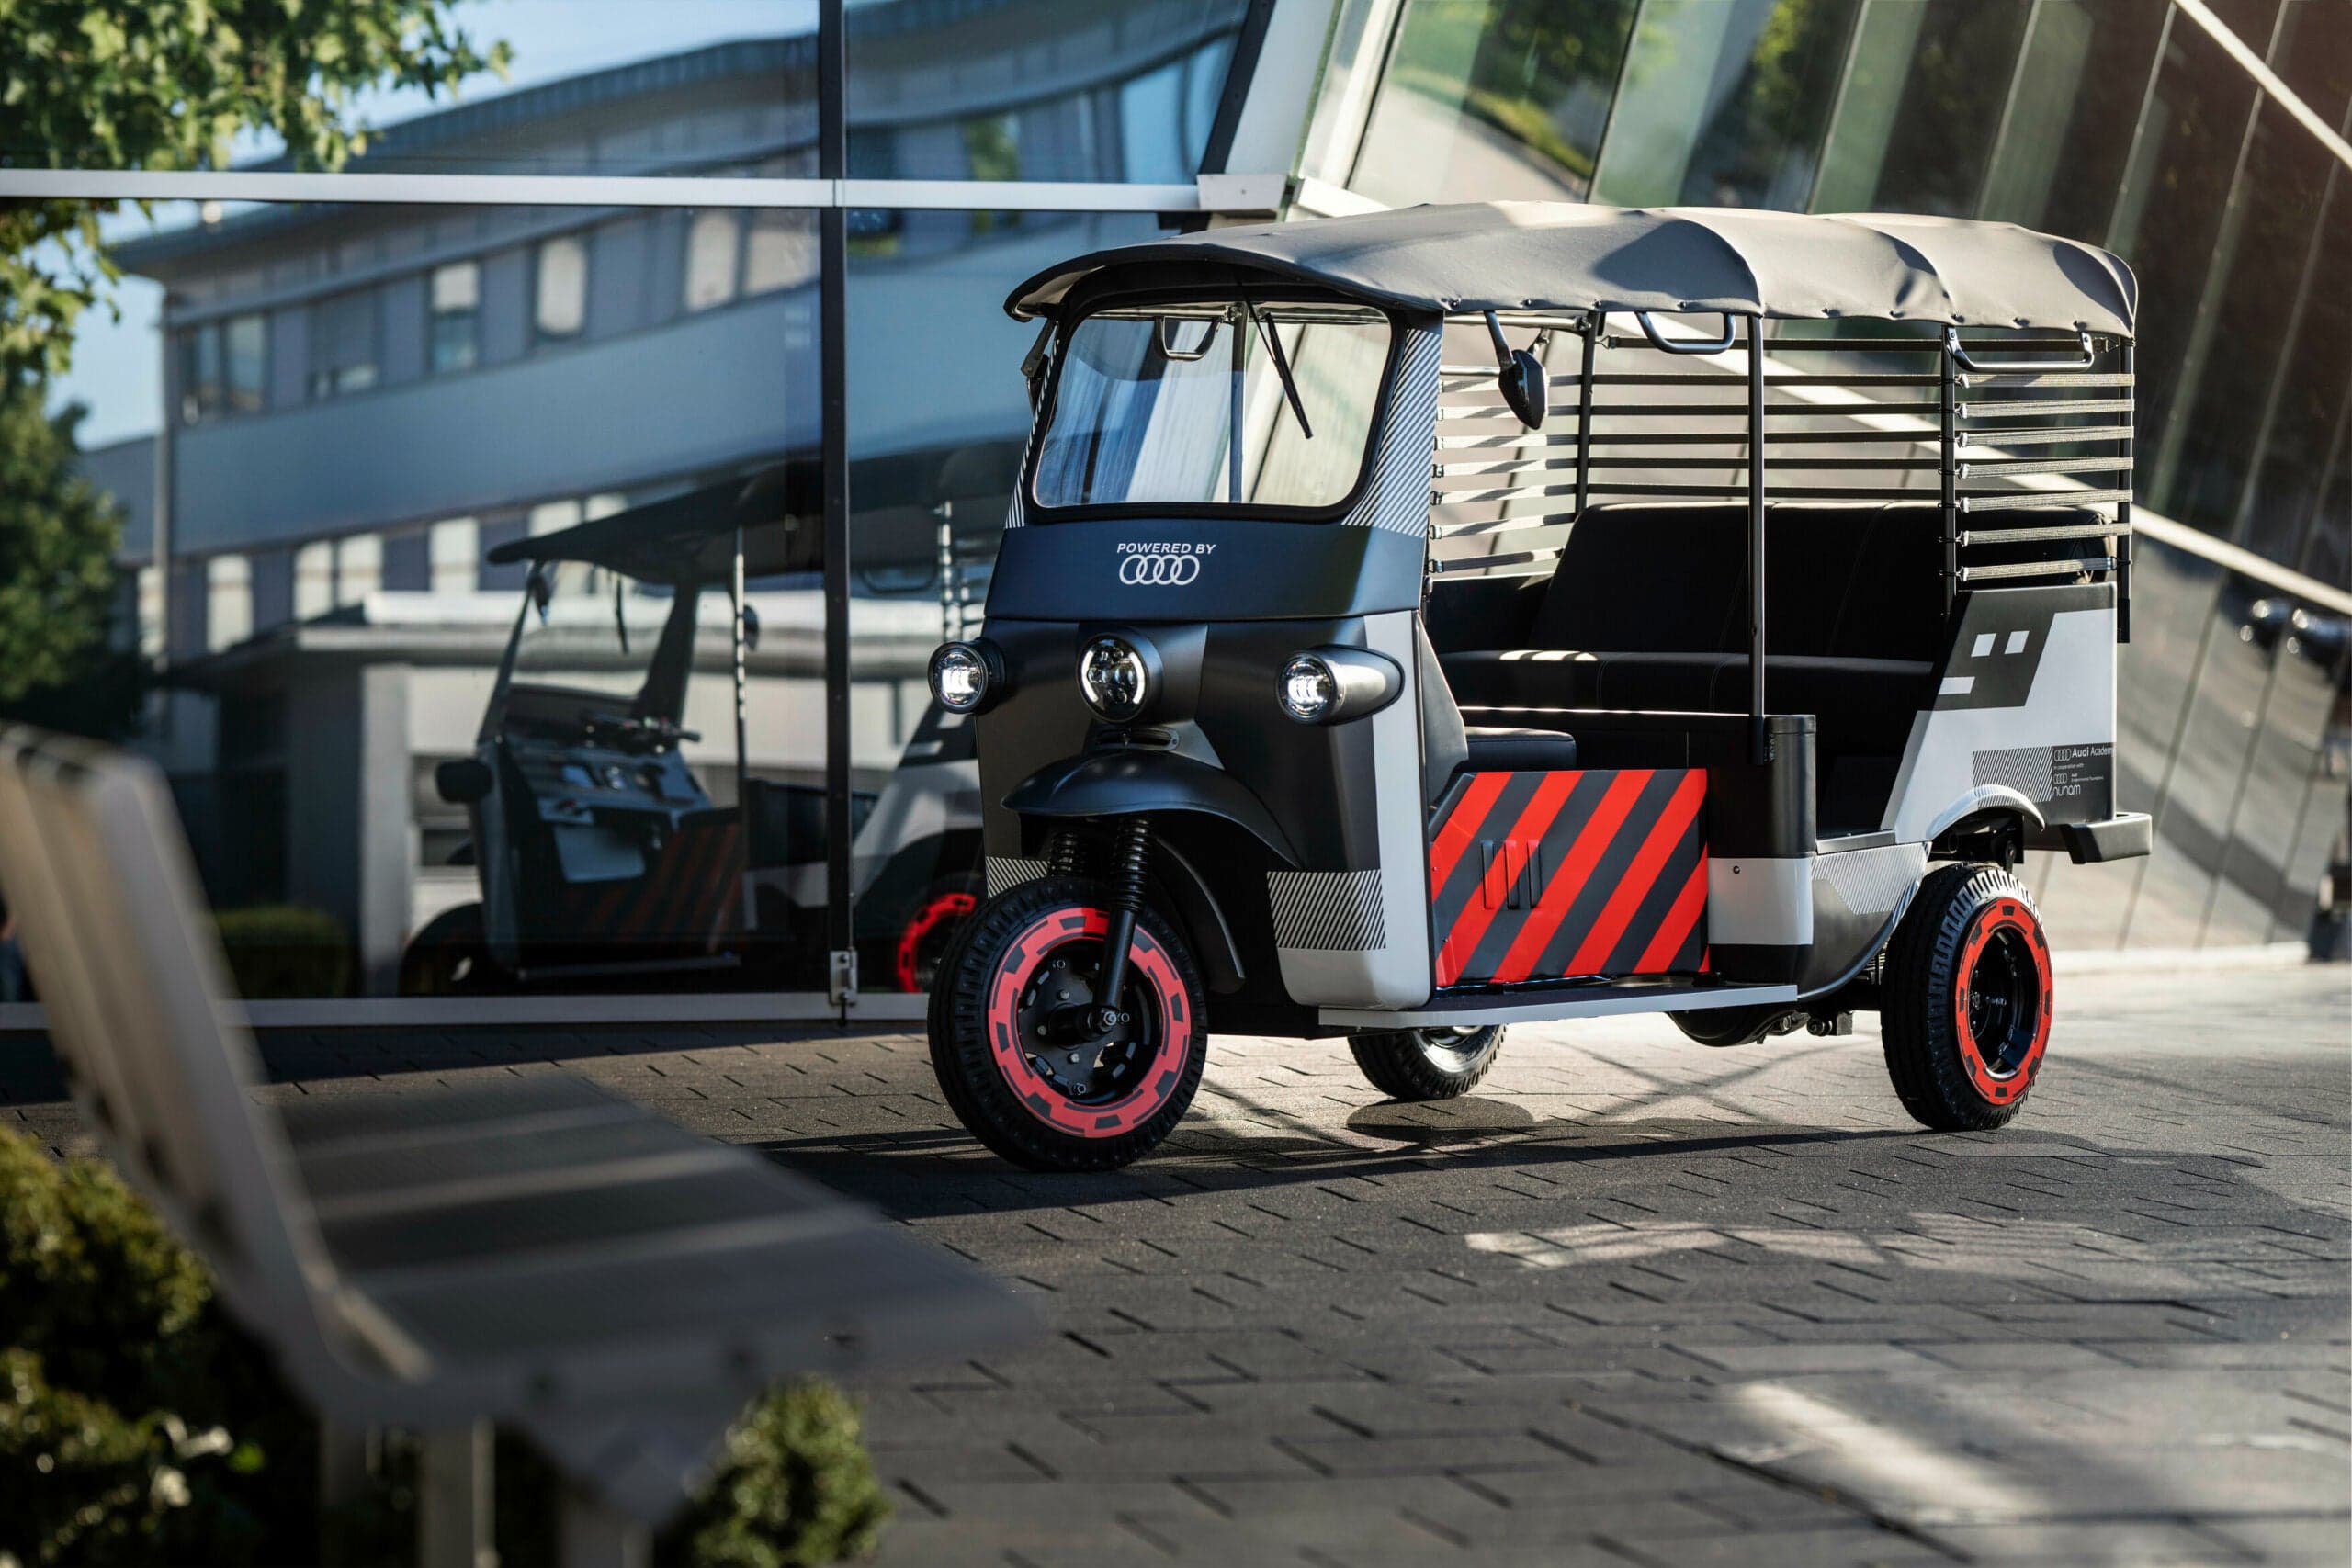 The E-Tron rickshaw in its Audi livery